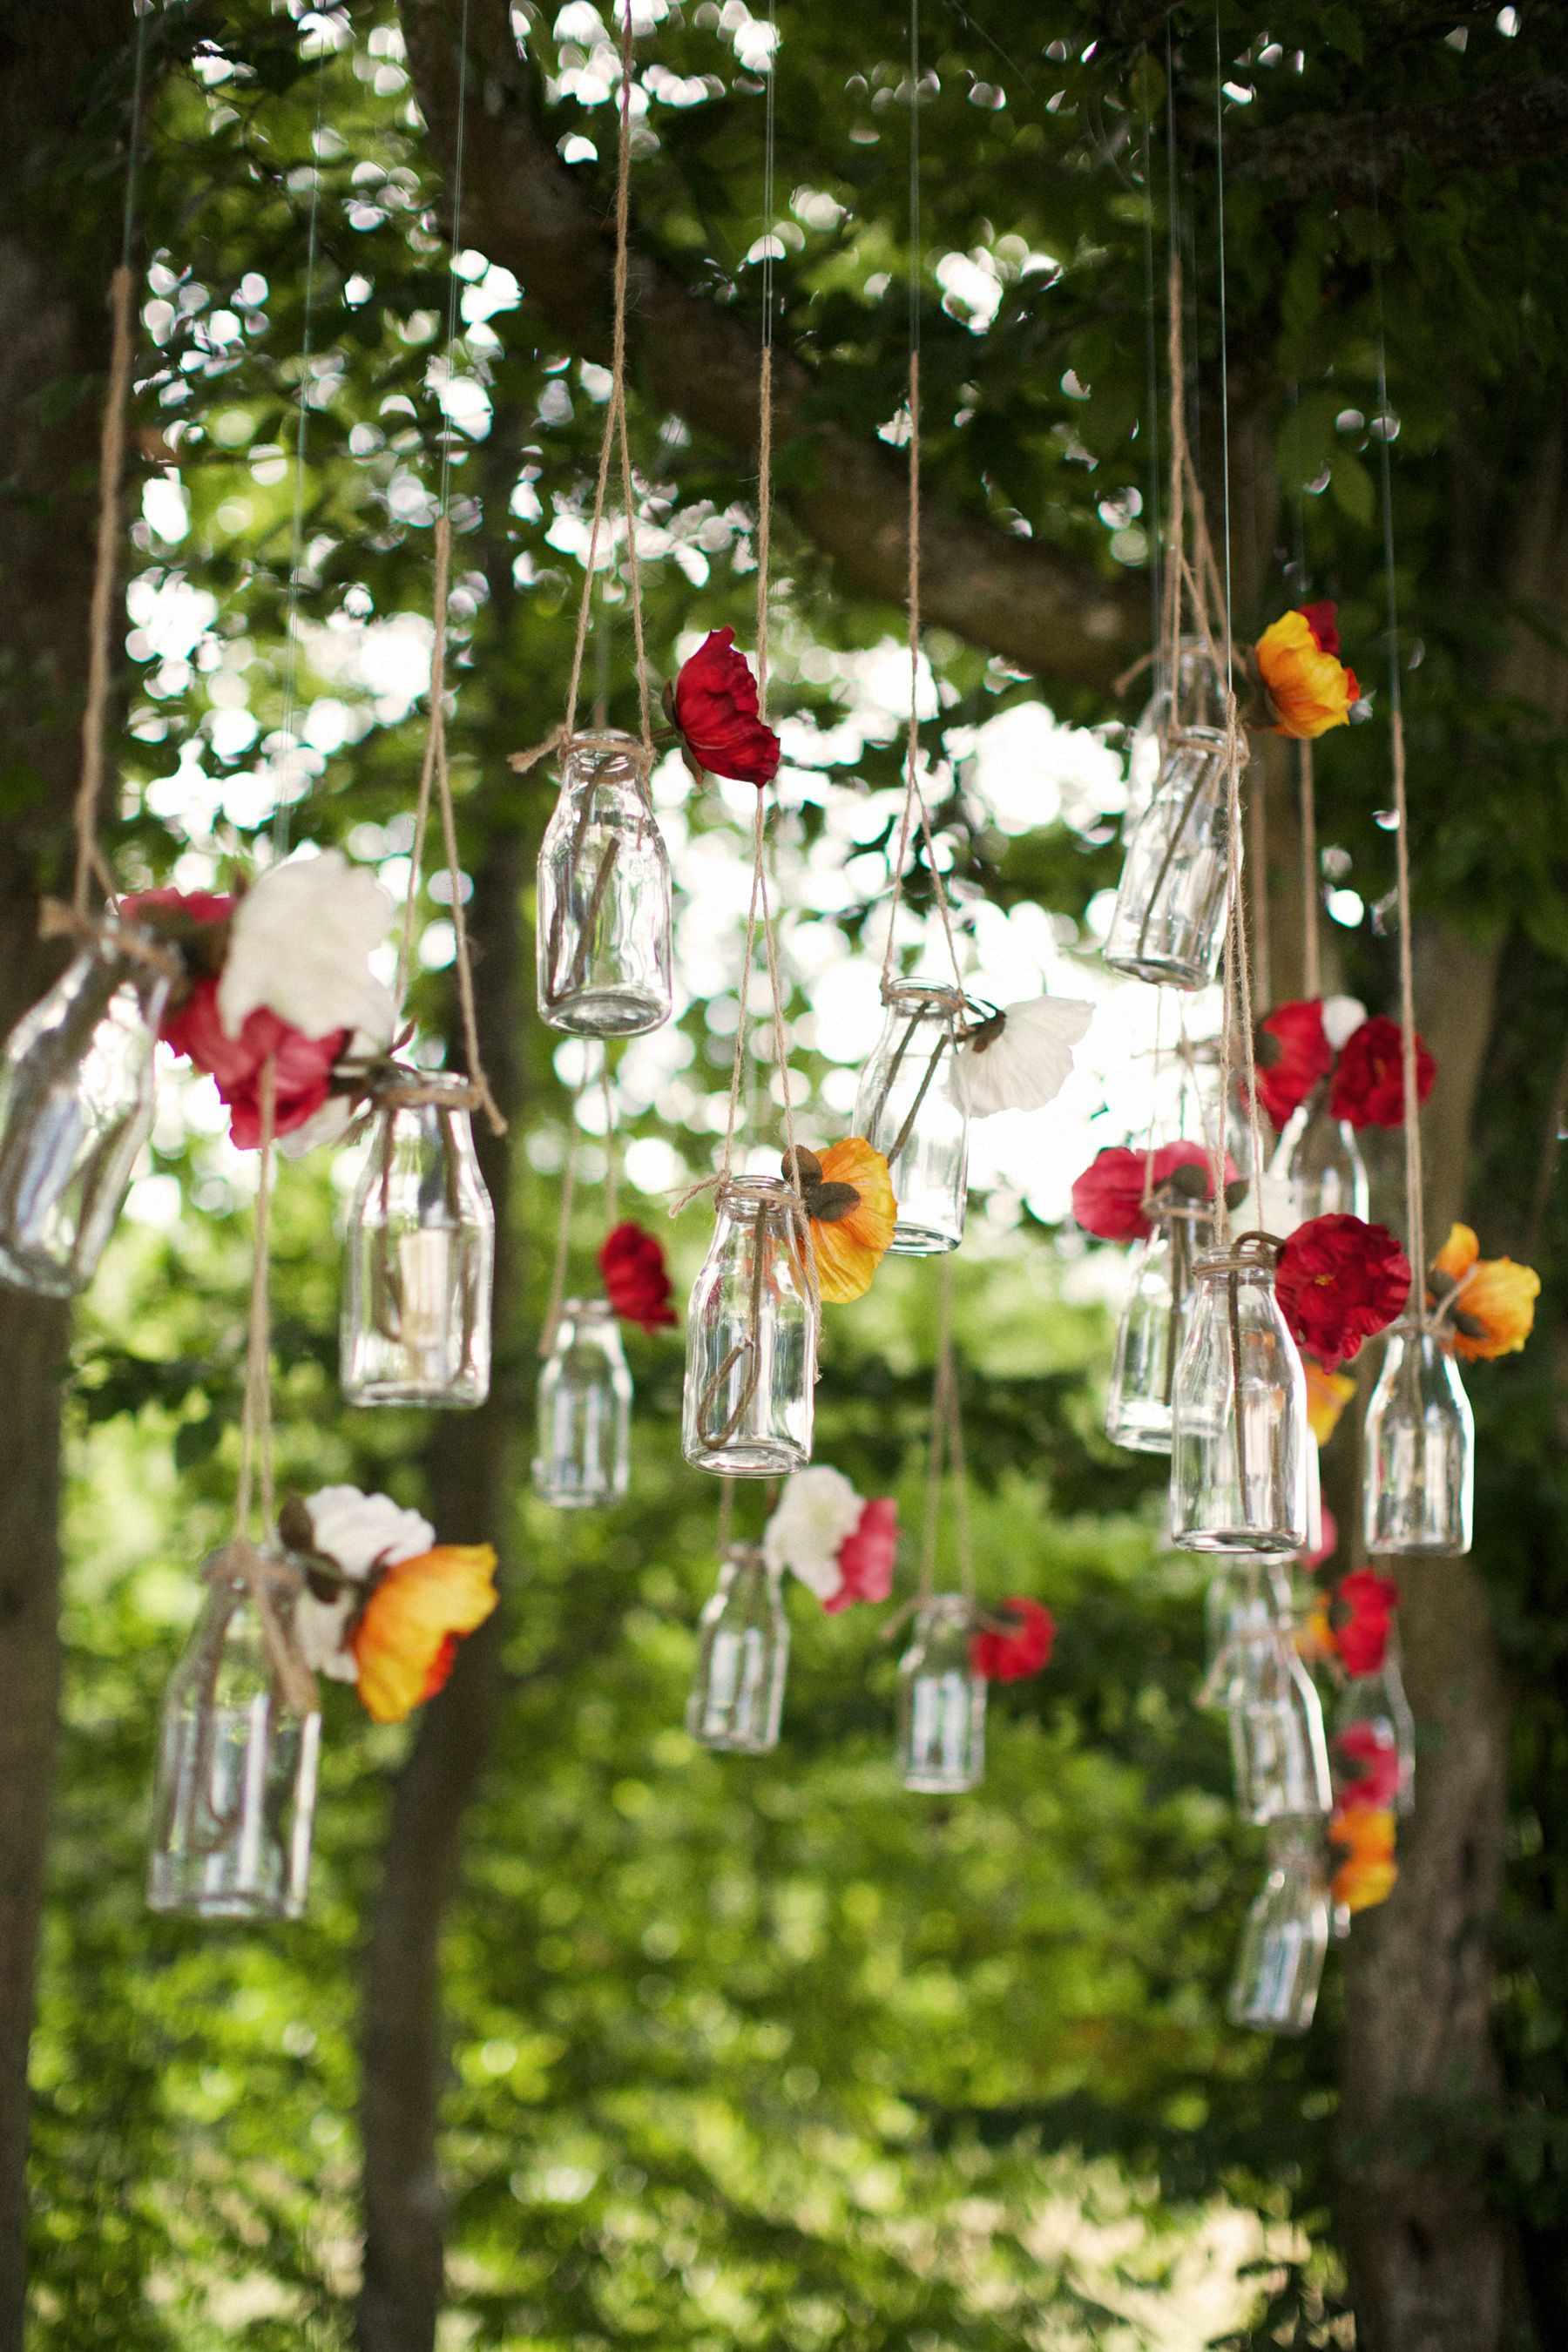 12 Best Rooting Vases Hanging 2024 free download rooting vases hanging of clear glass milk bottles great as flower vases or hanging to in clear glass milk bottles great as flower vases or hanging to create a feature